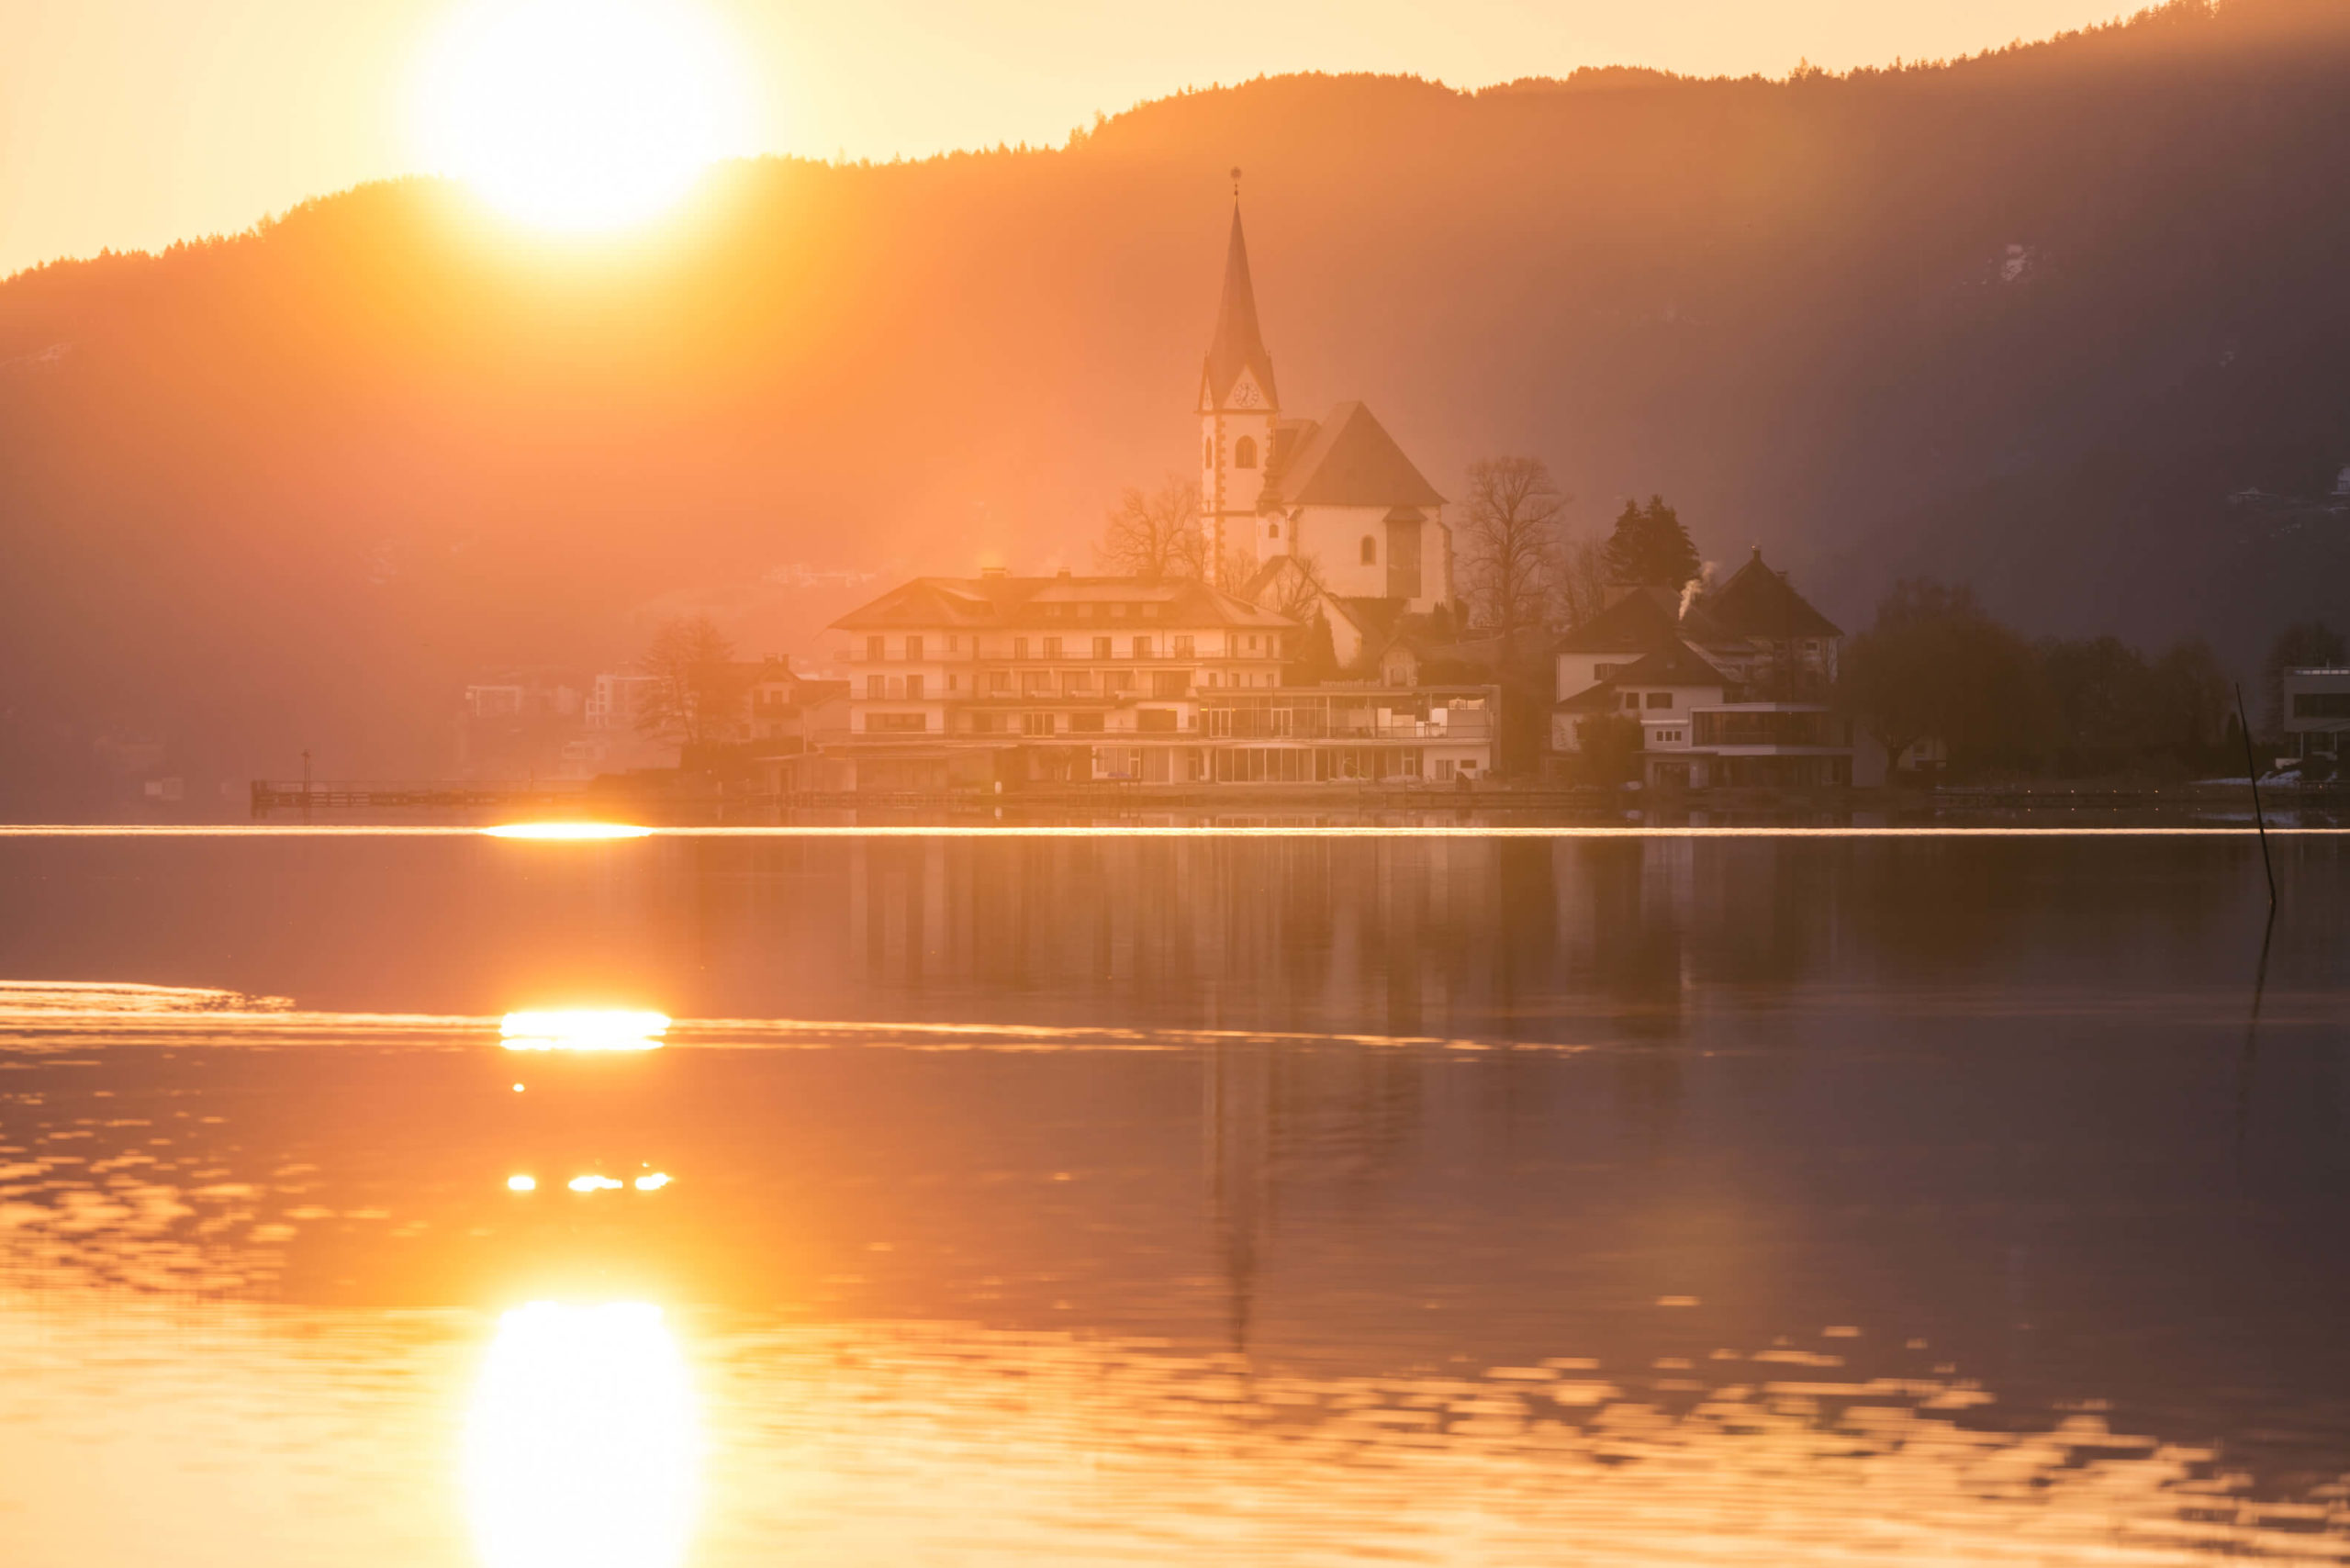 Golden morning sunrise over the pilgrim village and church of Maria Wörth on lake Wörthersee, Carinthia